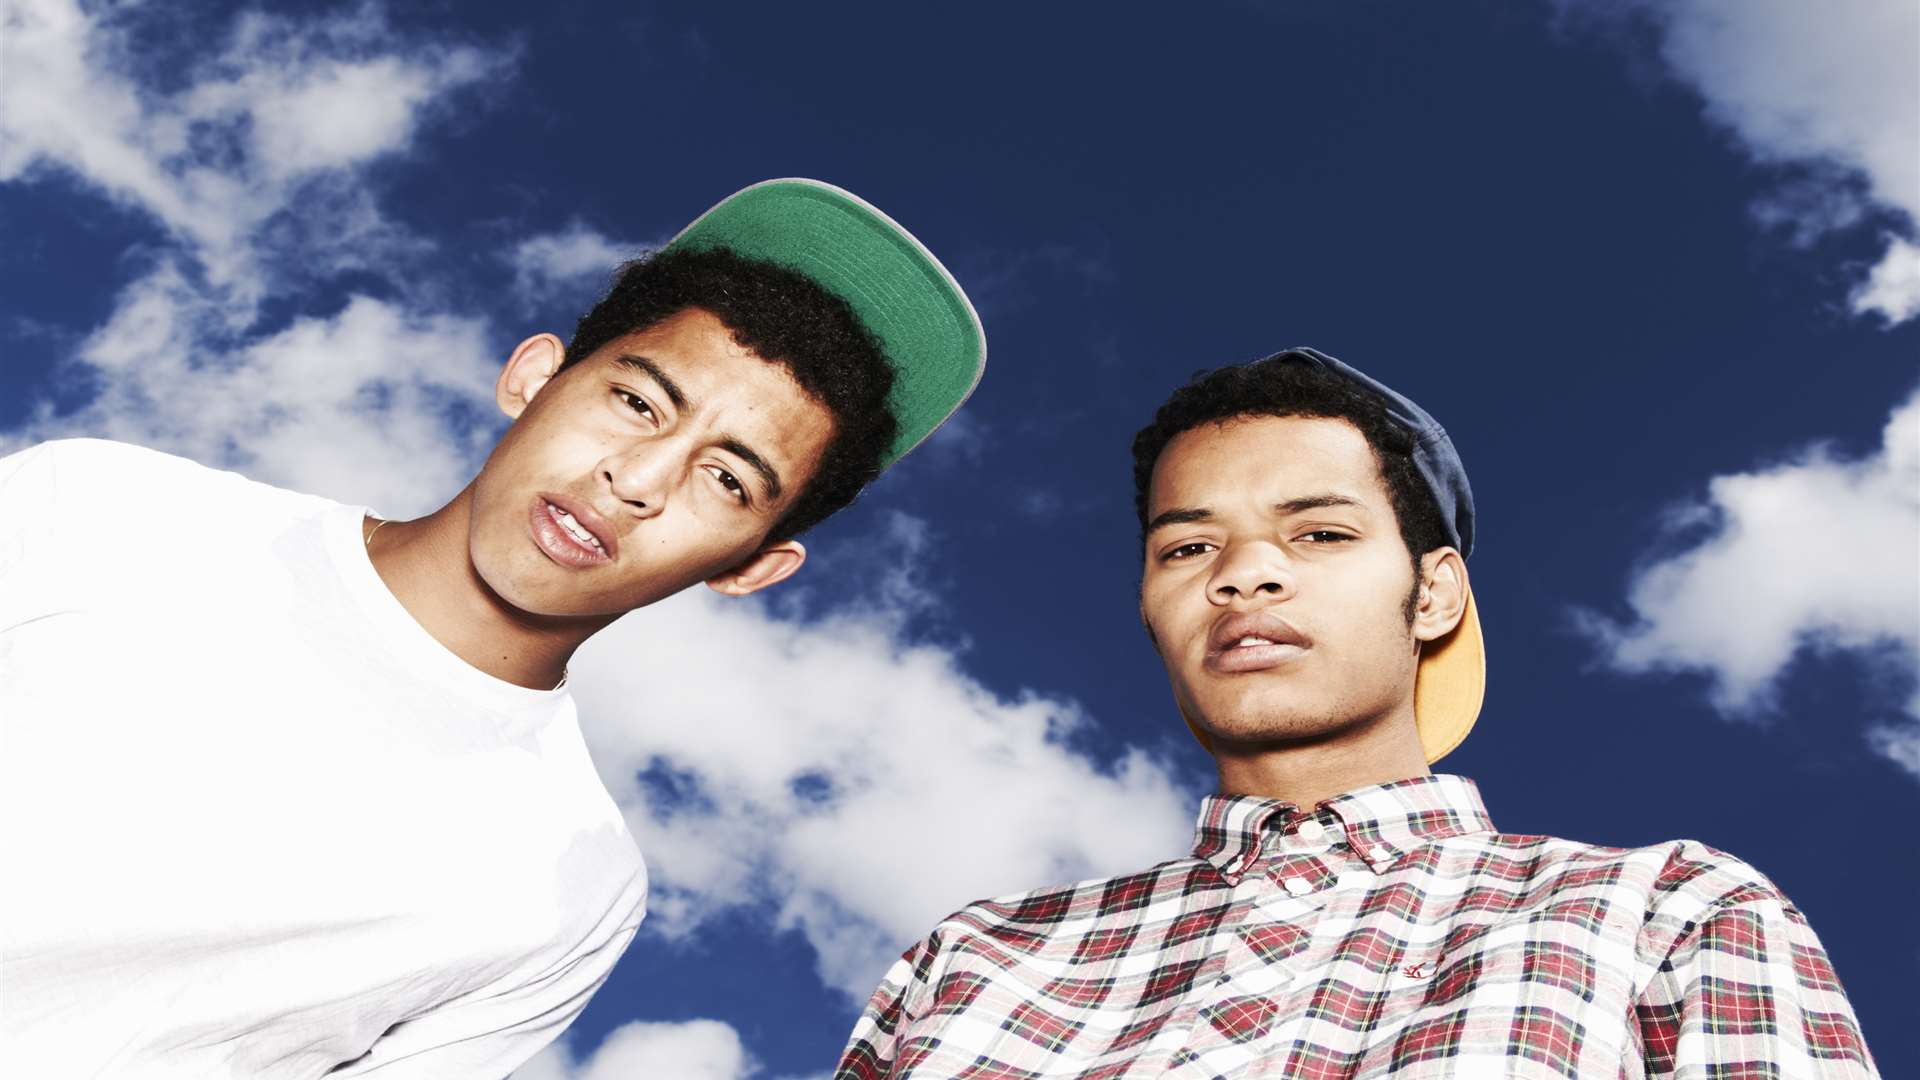 Rizzle Kicks has cancelled its November/December tour, including a performance at the Leas Cliff Hall